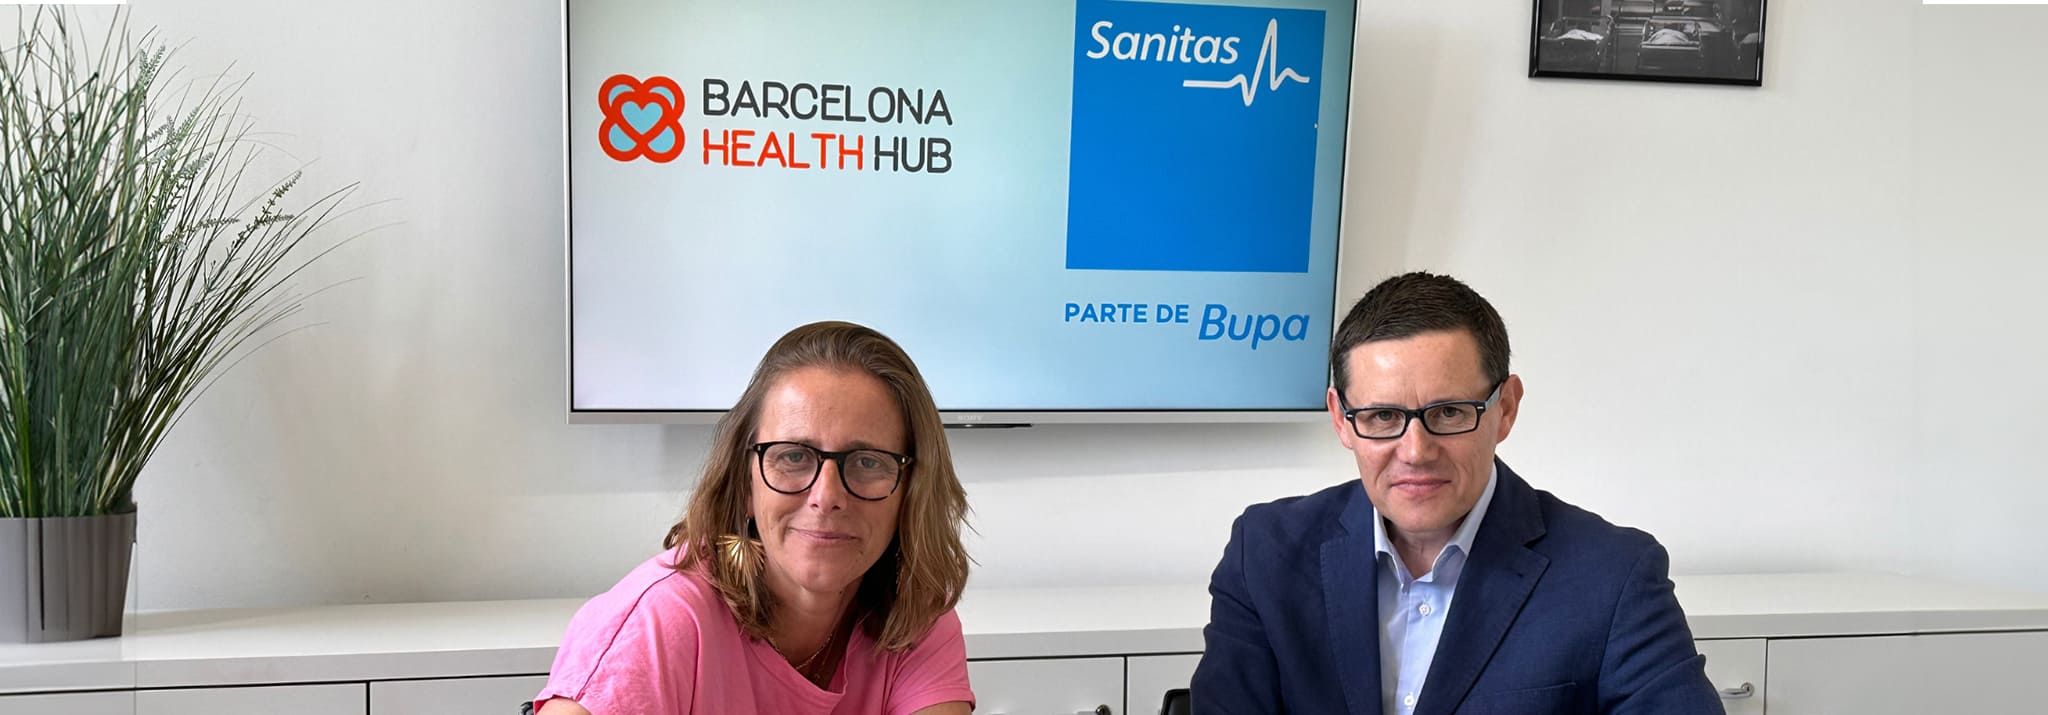 Sanitas and Barcelona Health Hub strengthen their partnership to drive digital transformation in healthcare